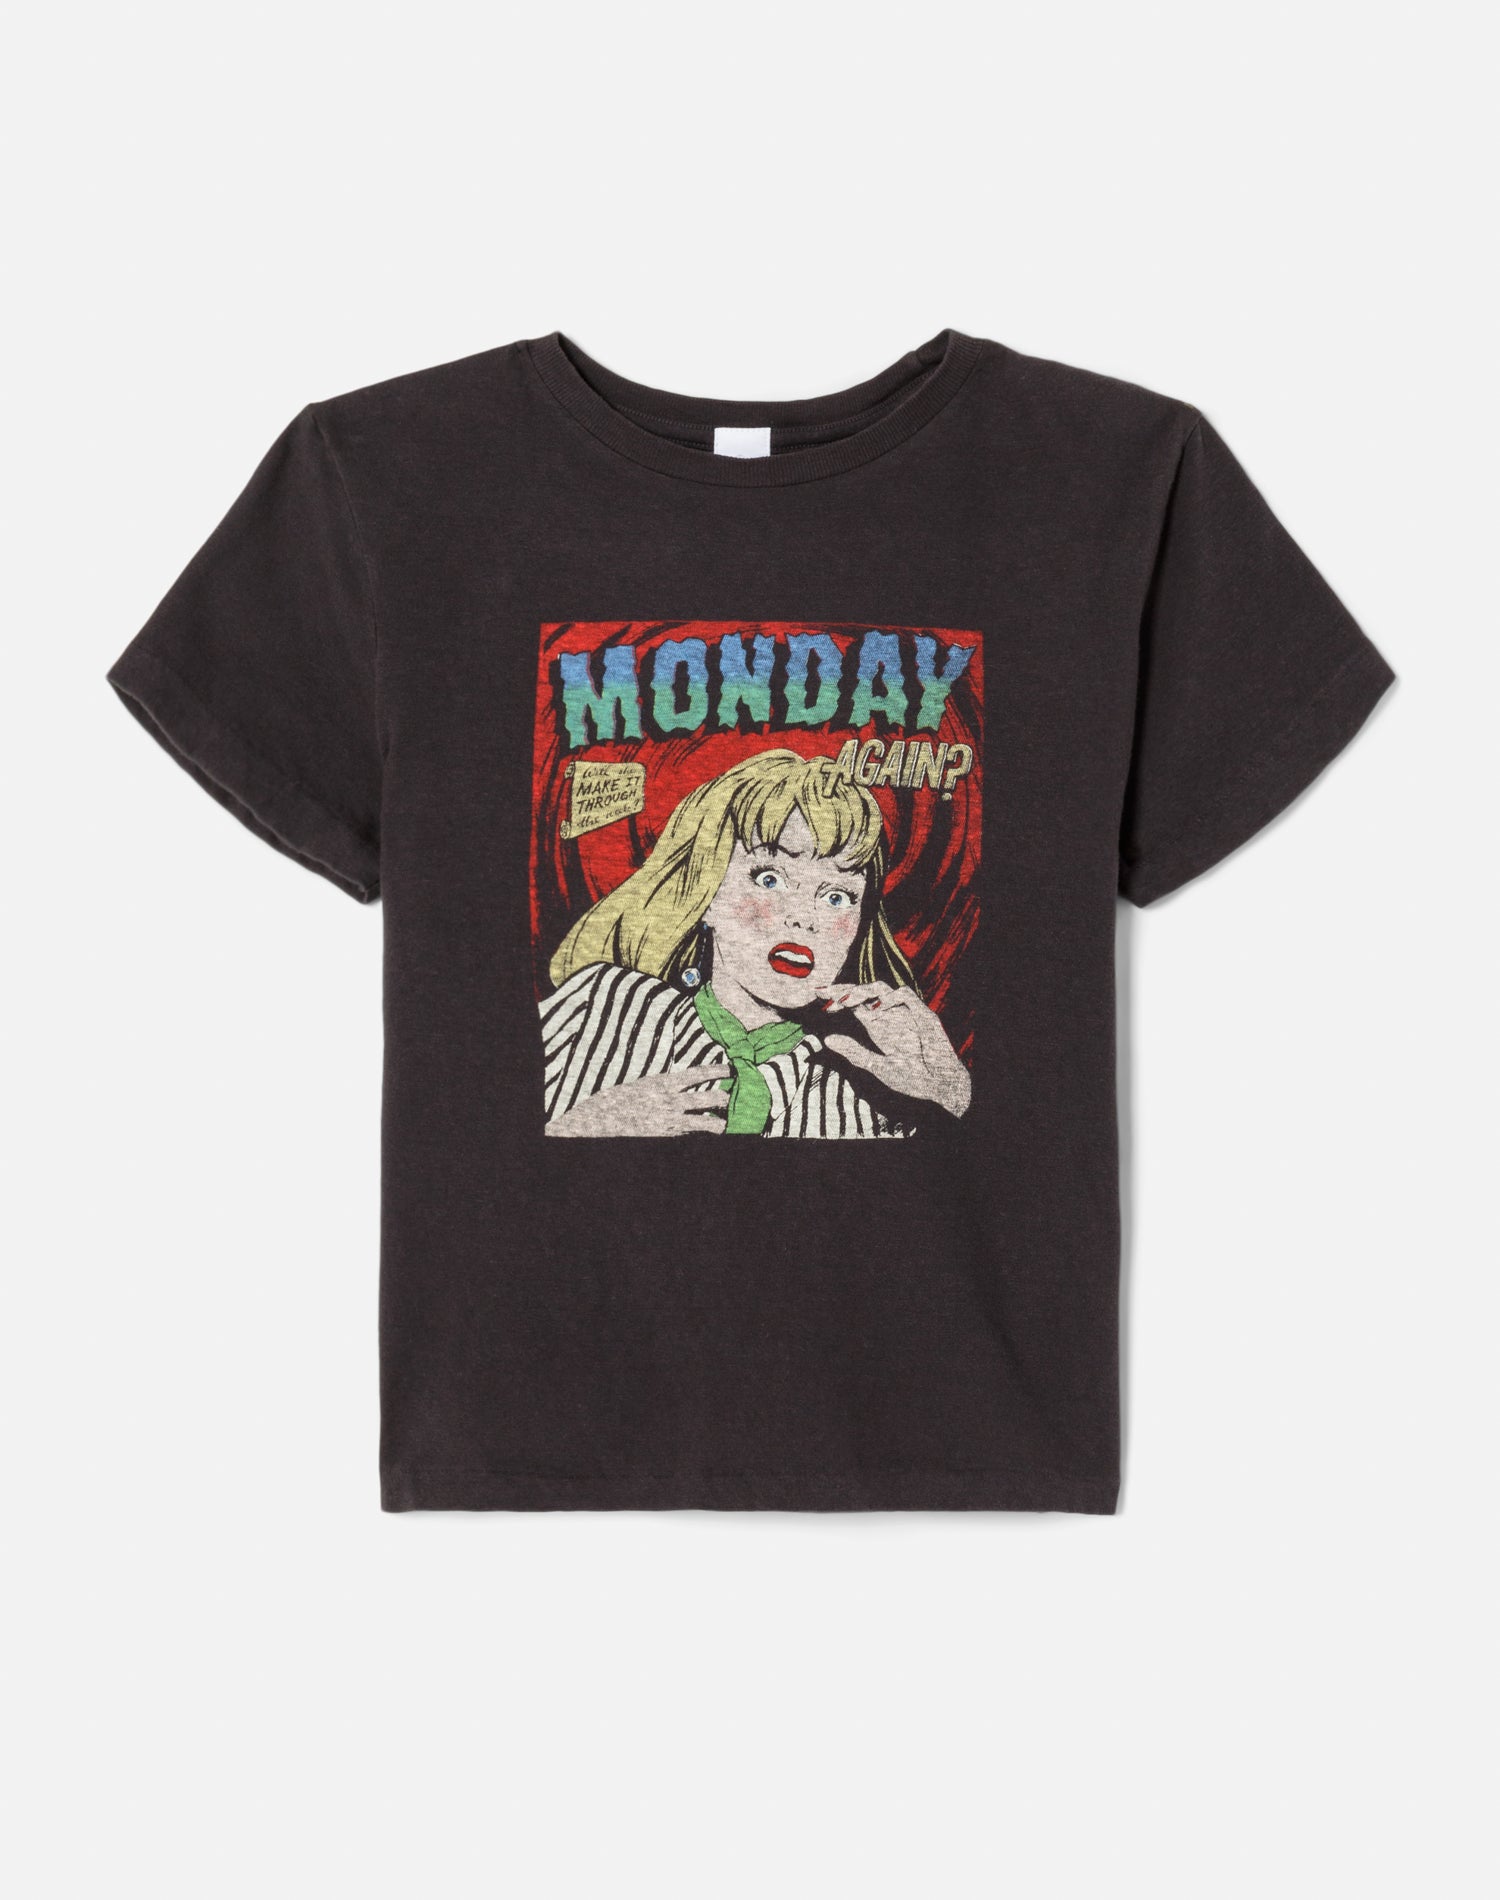 Classic Tee "Monday Again" - Washed Black